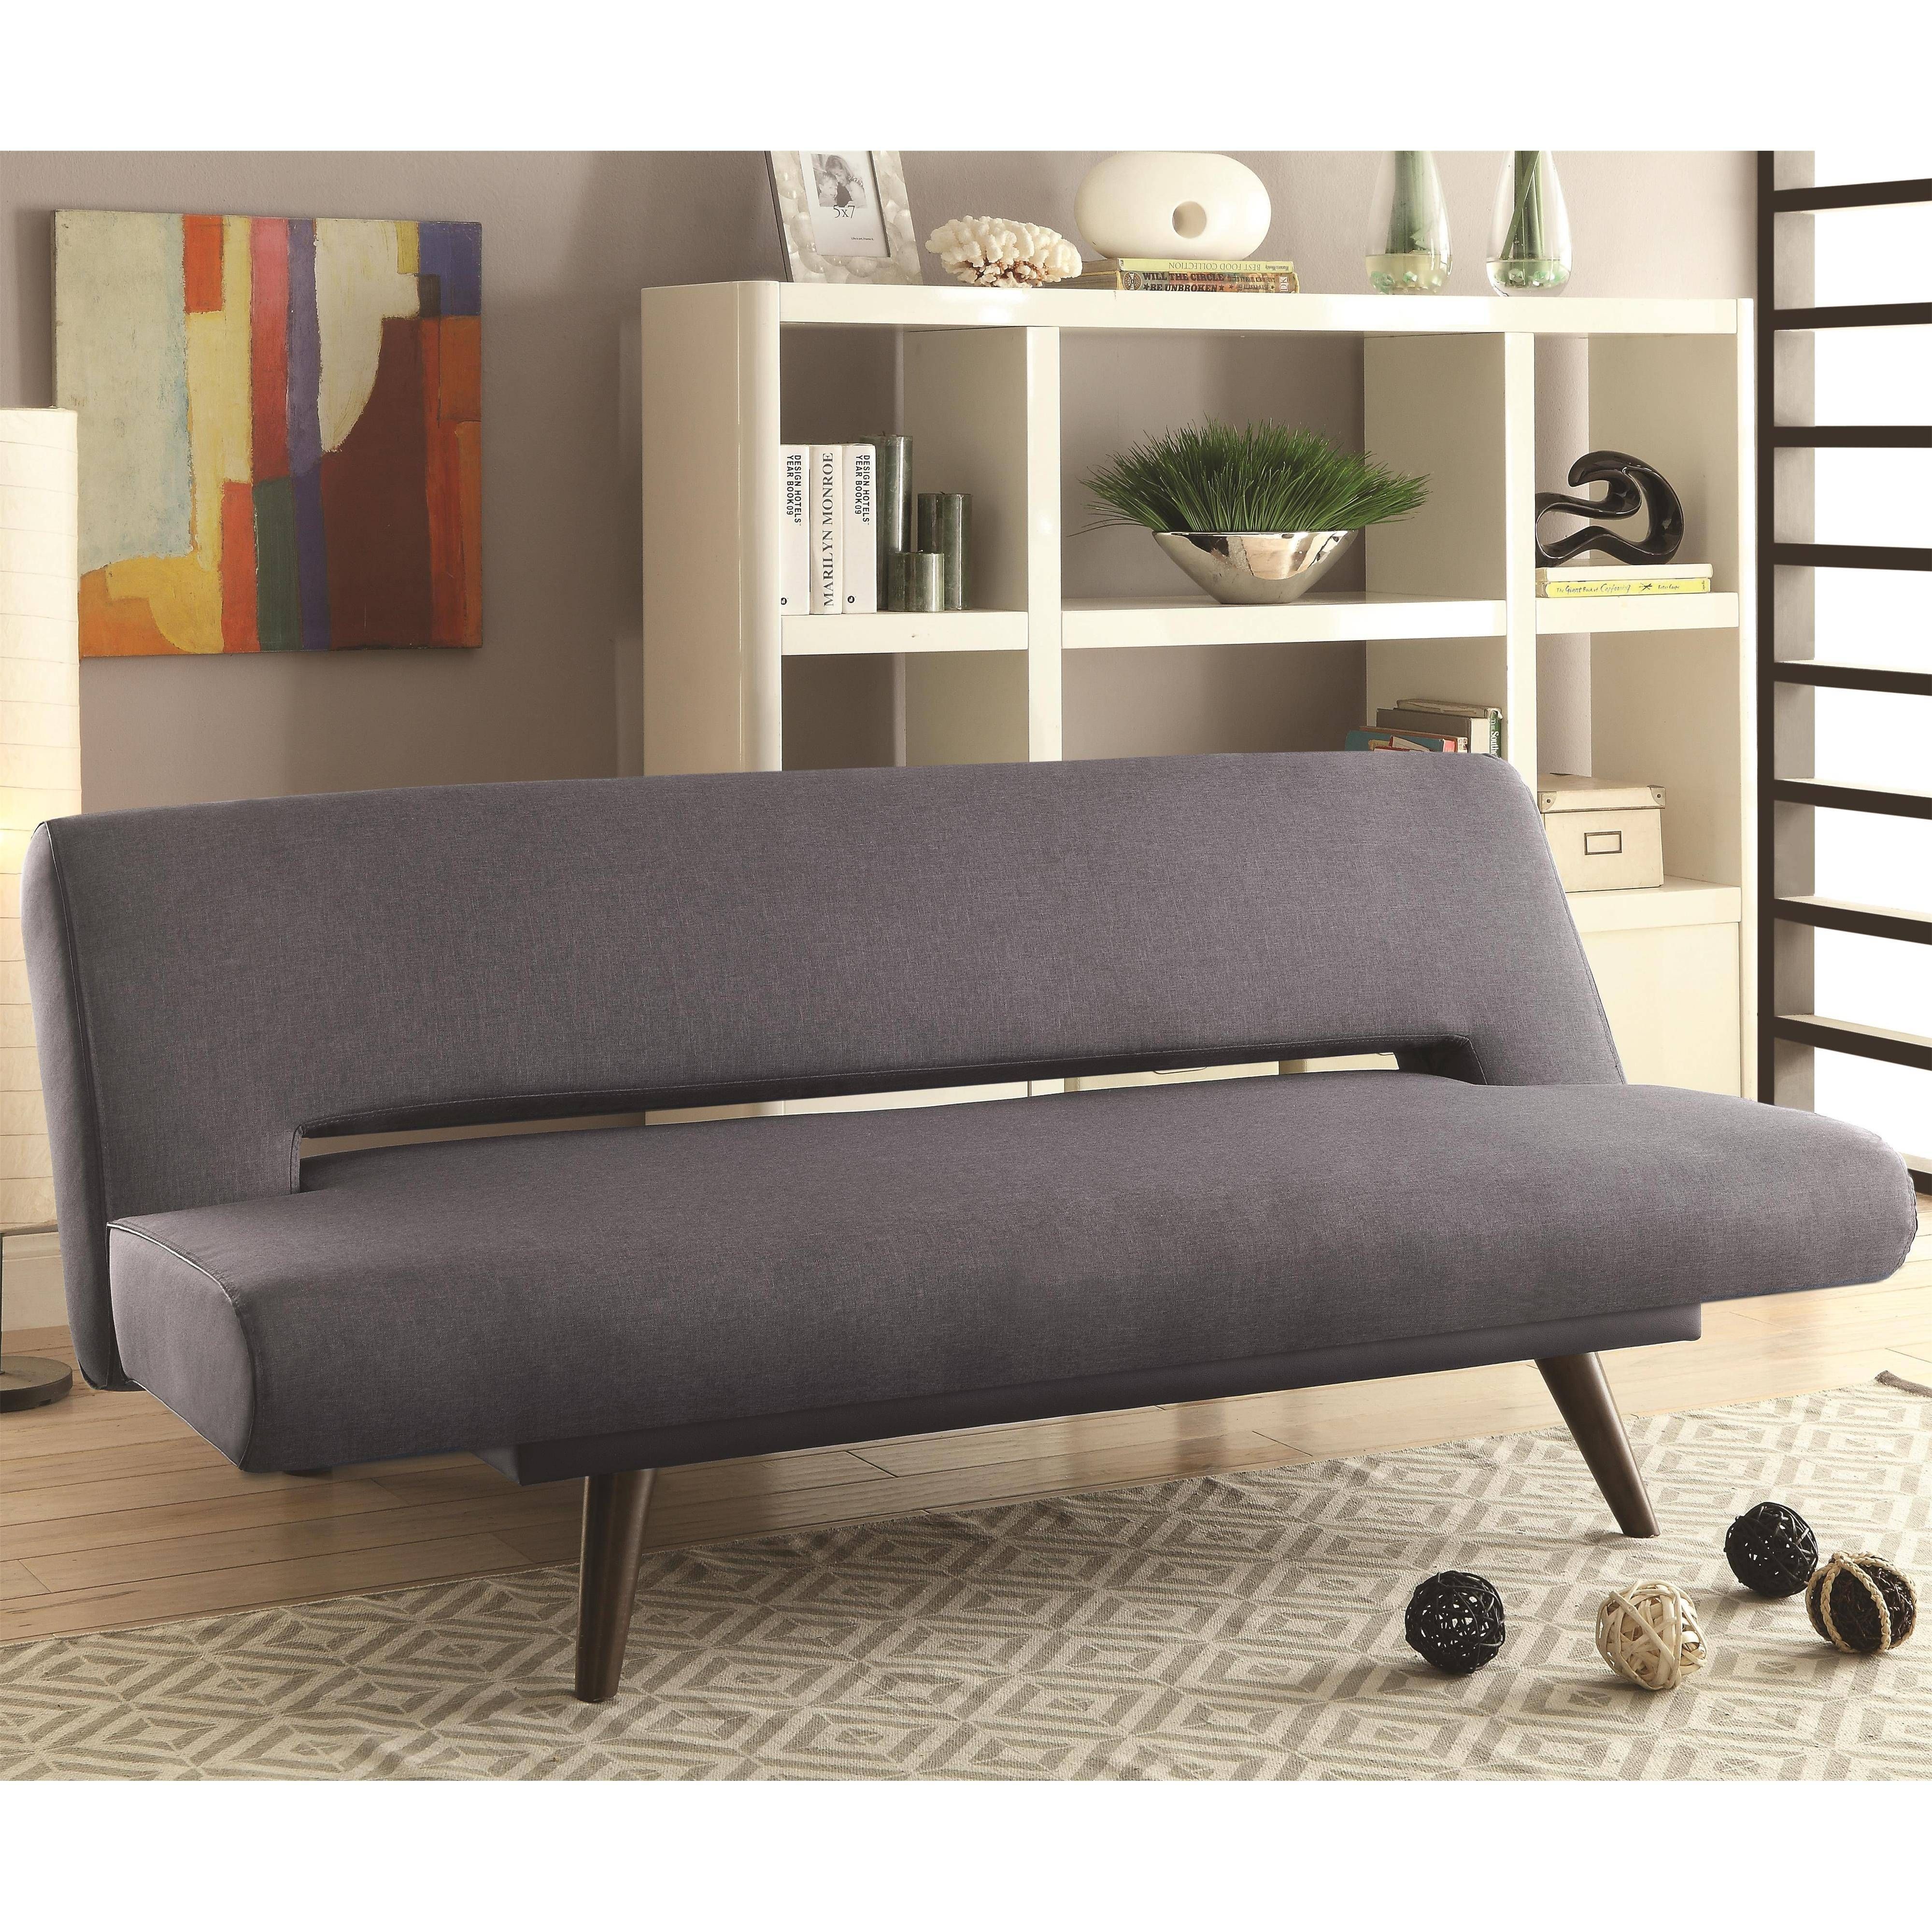 Coaster Sofa Beds And Futons – Mid Century Modern Adjustable Sofa Within Coaster Futon Sofa Beds (View 3 of 15)